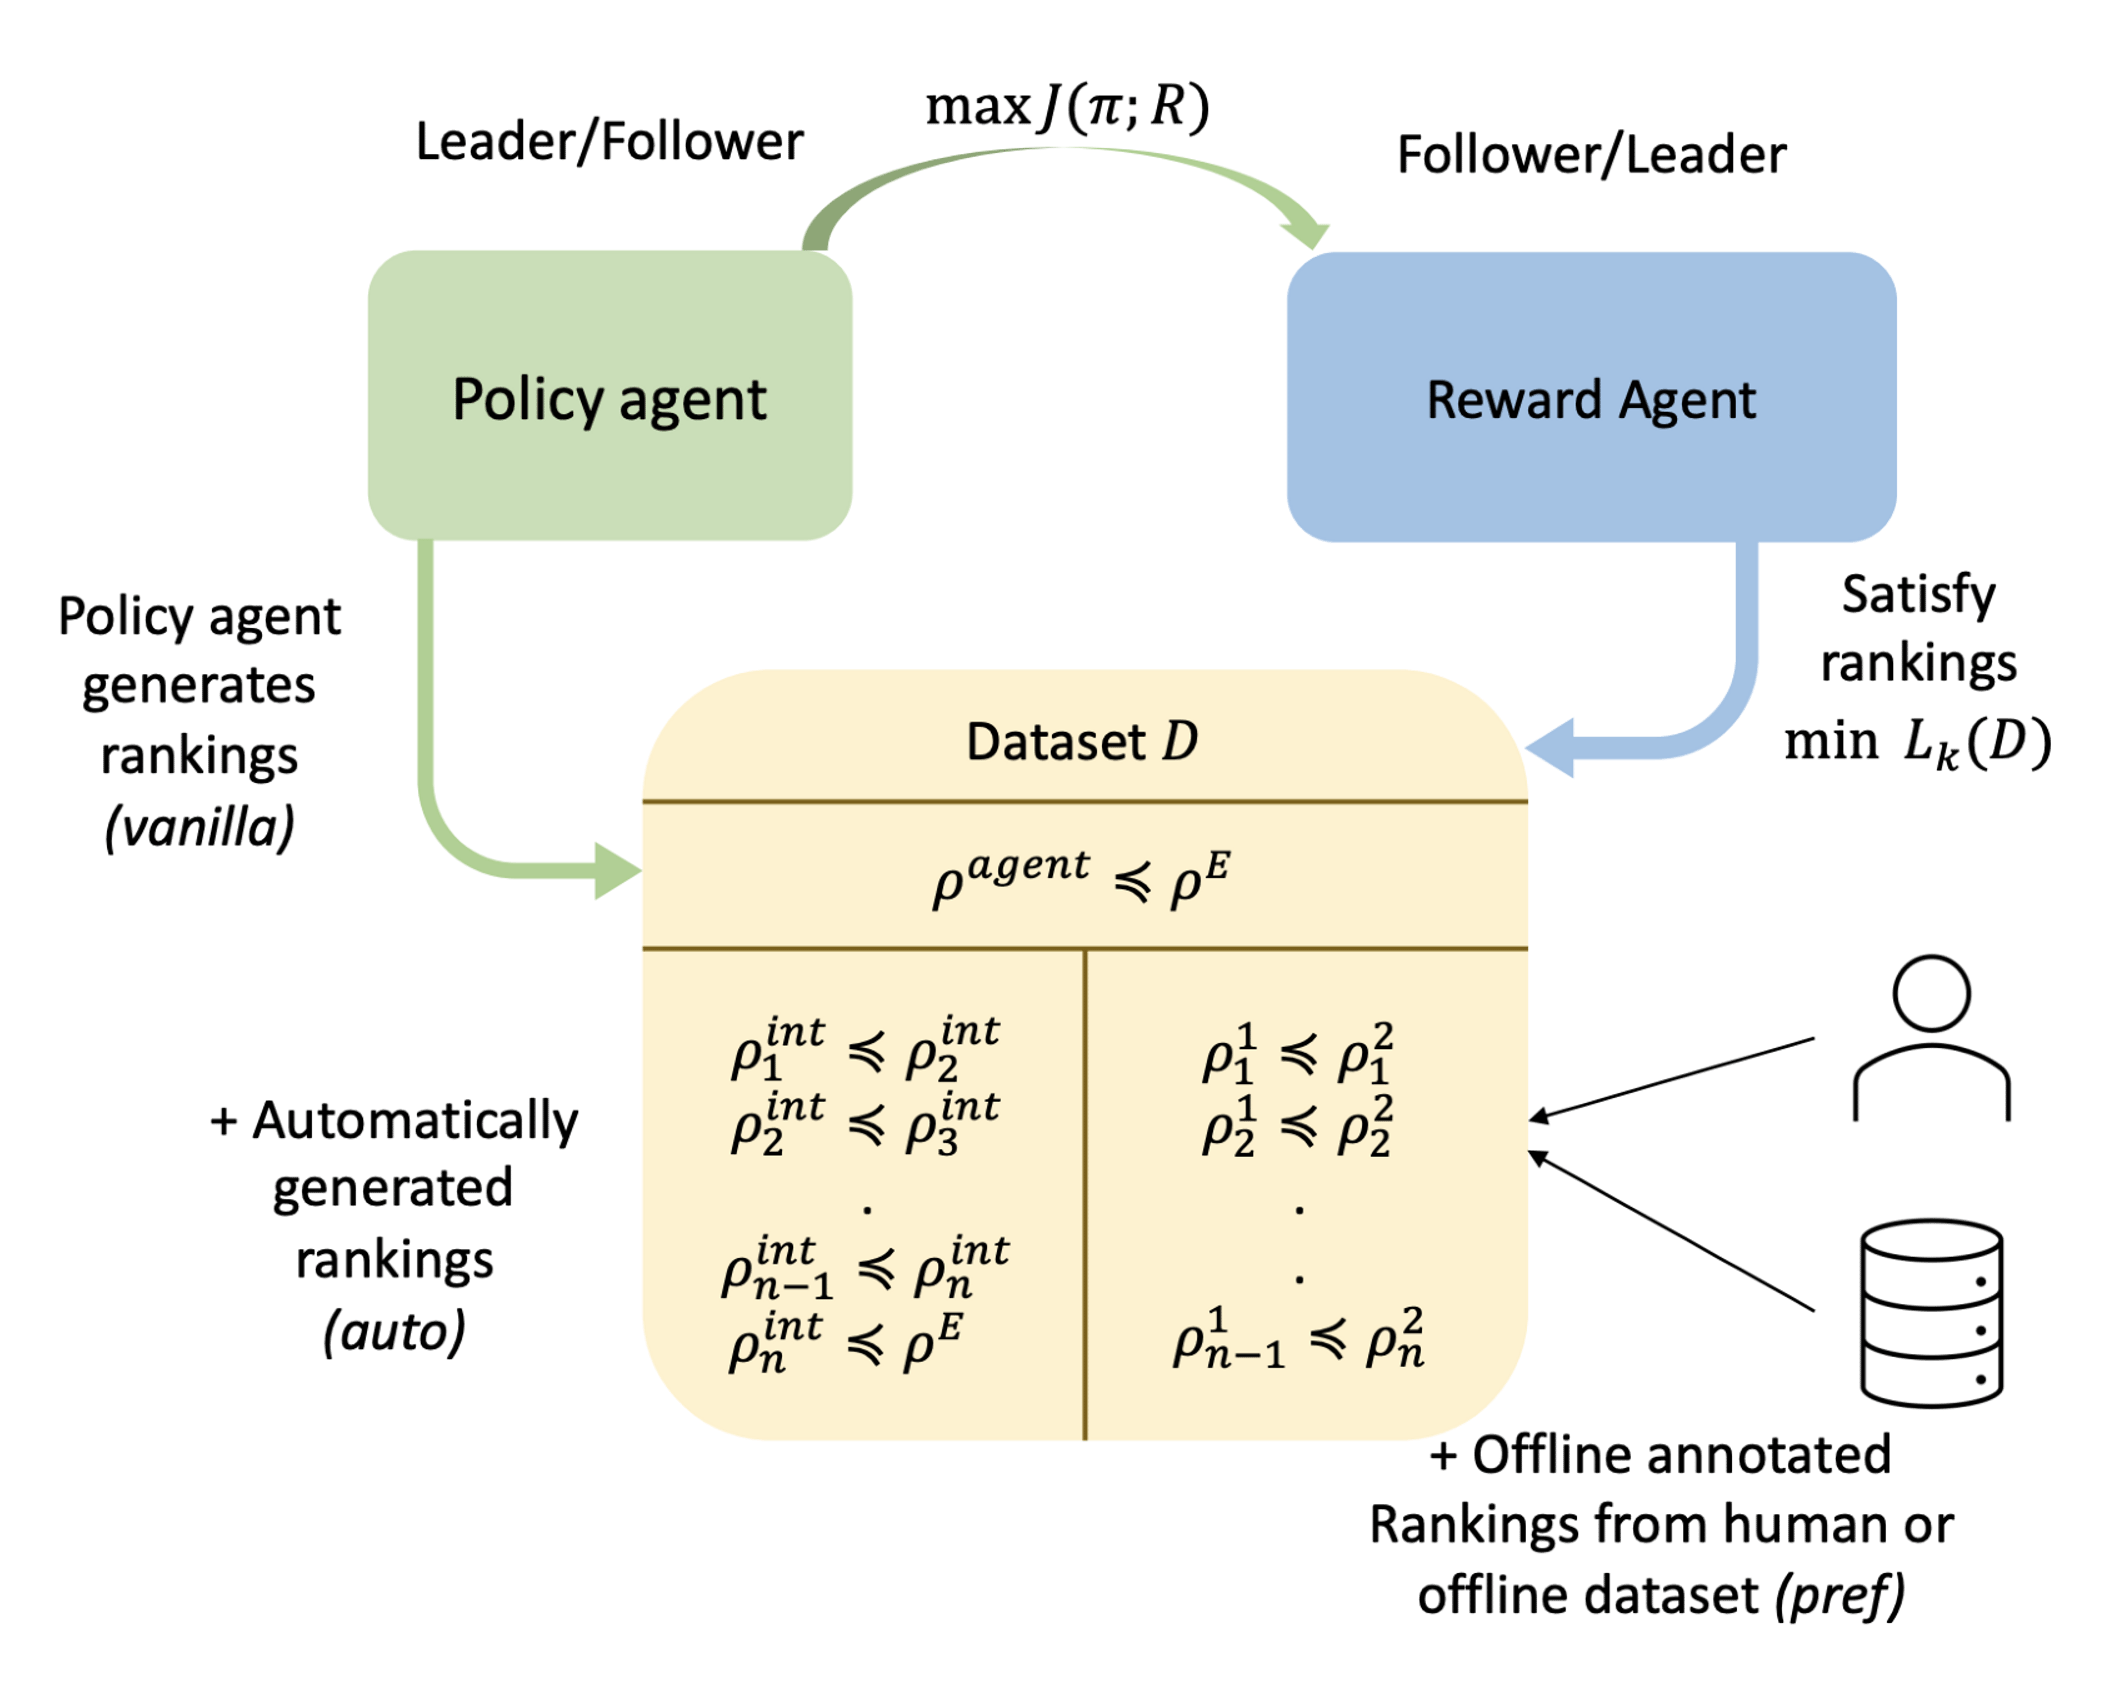 A flow chart with, clockwise from top left, a green box labeled “policy agent,” a blue box labeled “reward agent,” and an orange box label “Dataset D,” which contains pairwise behavior rankings obtained from three sources. An arrow points from the policy agent to the dataset, indicating the policy’s contribution of rankings. An arrow pointing from the policy agent to the reward is labeled with the optimization strategy. An arrow pointing from the reward agent to the dataset is labeled with the ranking loss function.